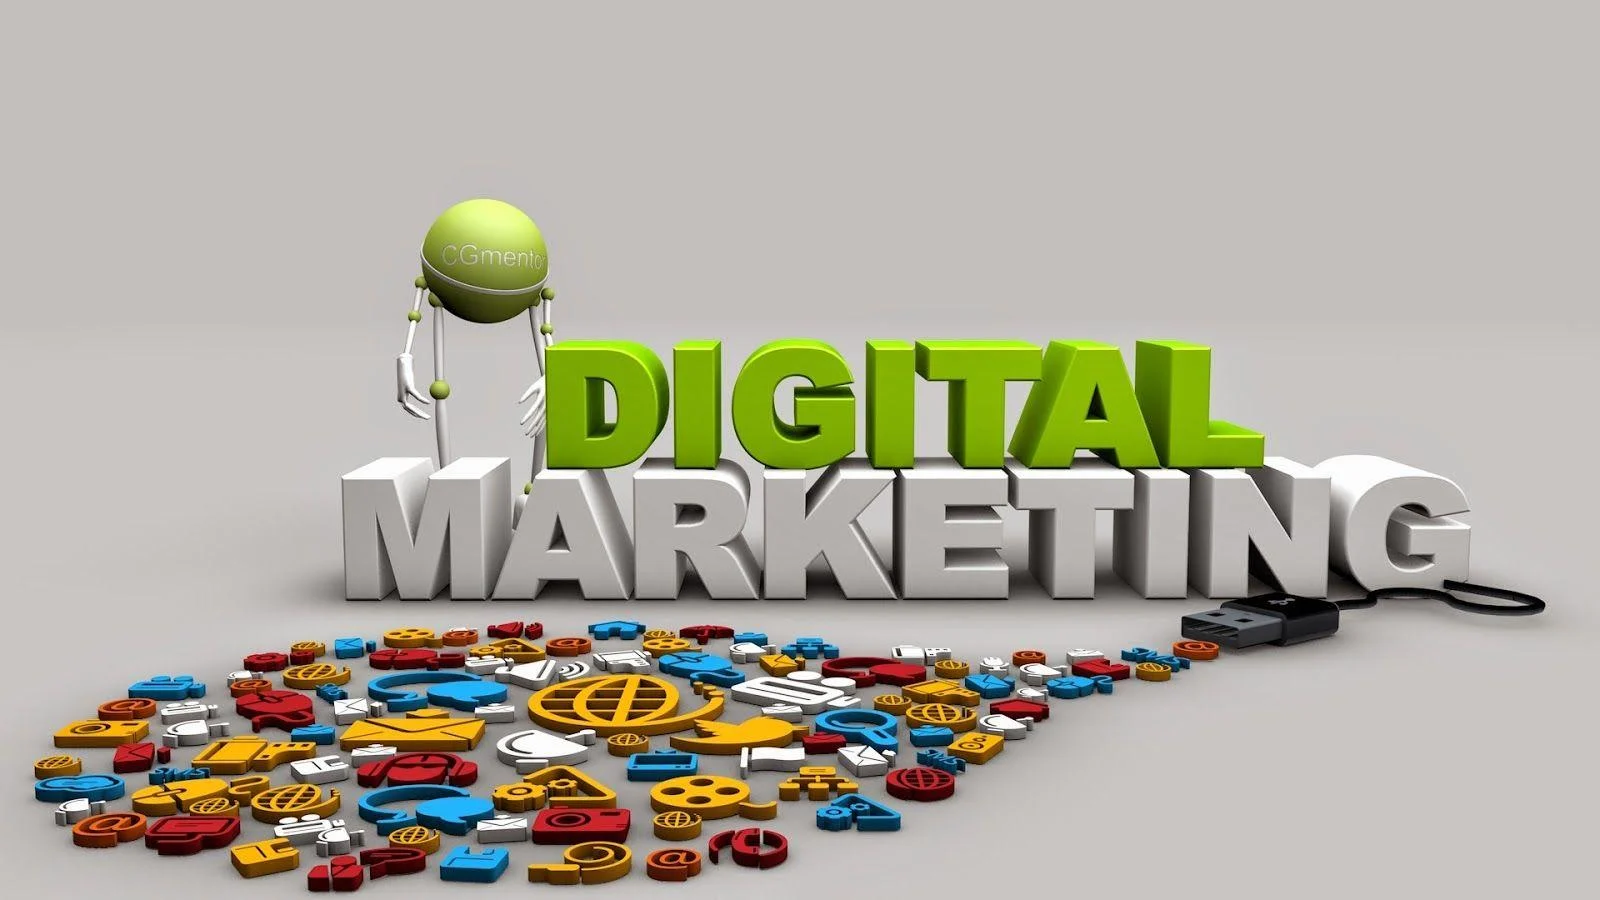 How to find the best digital marketing agency in 2020?